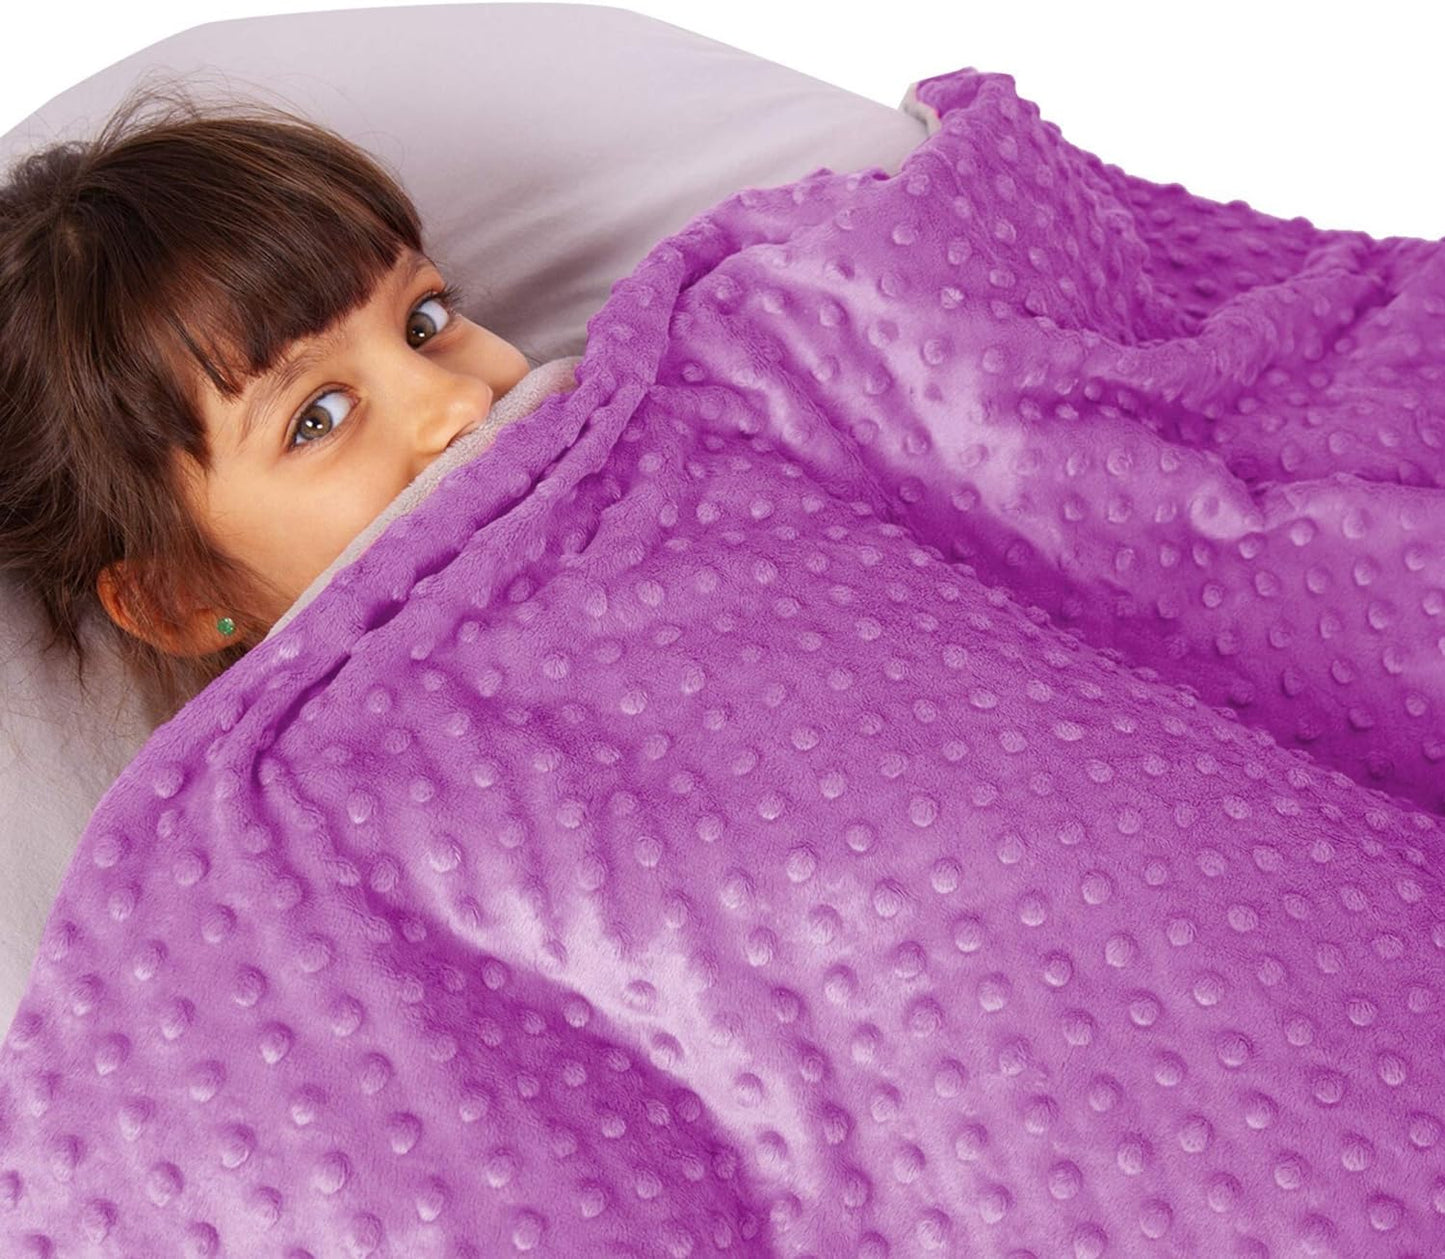 7 Lbs Weighted Blanket for Kids with Removable Cover - 41" x 60"